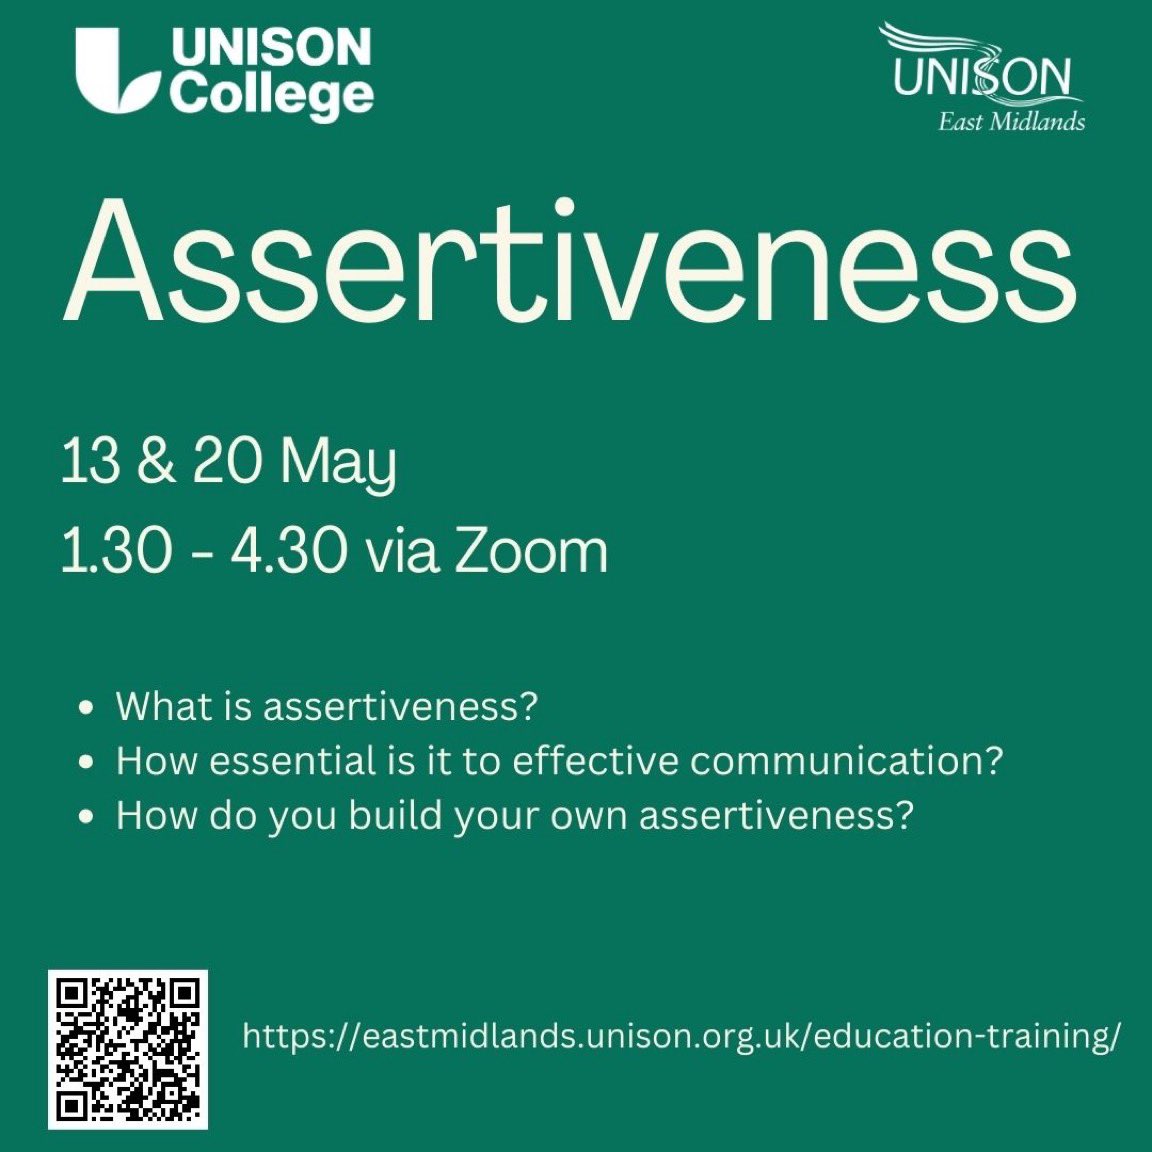 Good morning 👊 Remember Alan Partridges, I used to be indecisive but now I am not so sure! 😉
Free @unisonlearning learning 👇👊👇 #Assertiveness